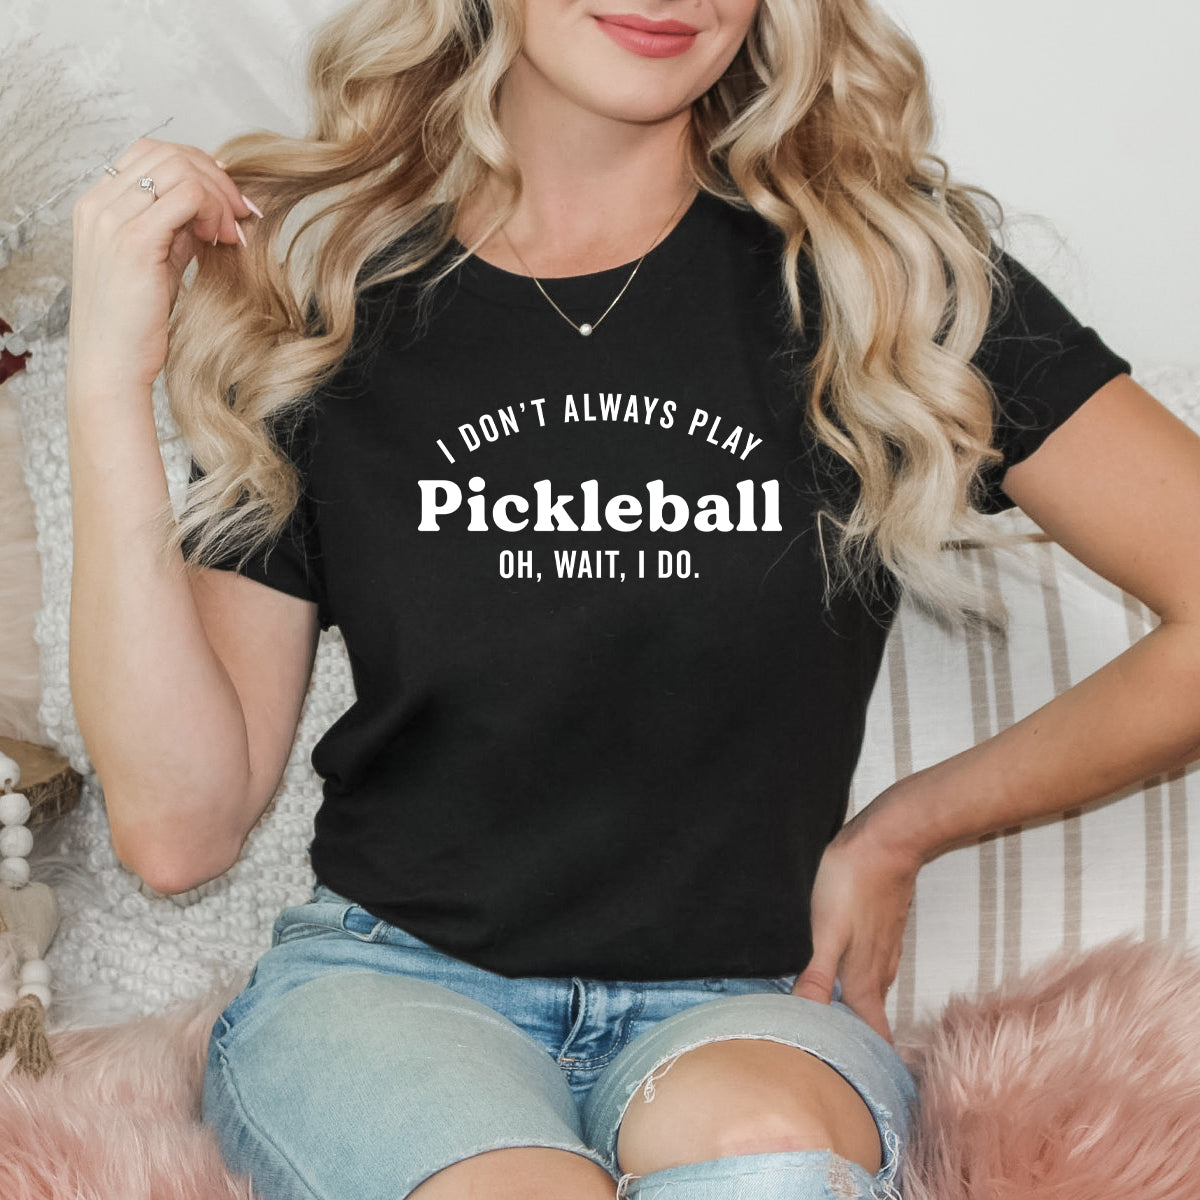 I Don't Always Play Pickleball | Short Sleeve Graphic Tee